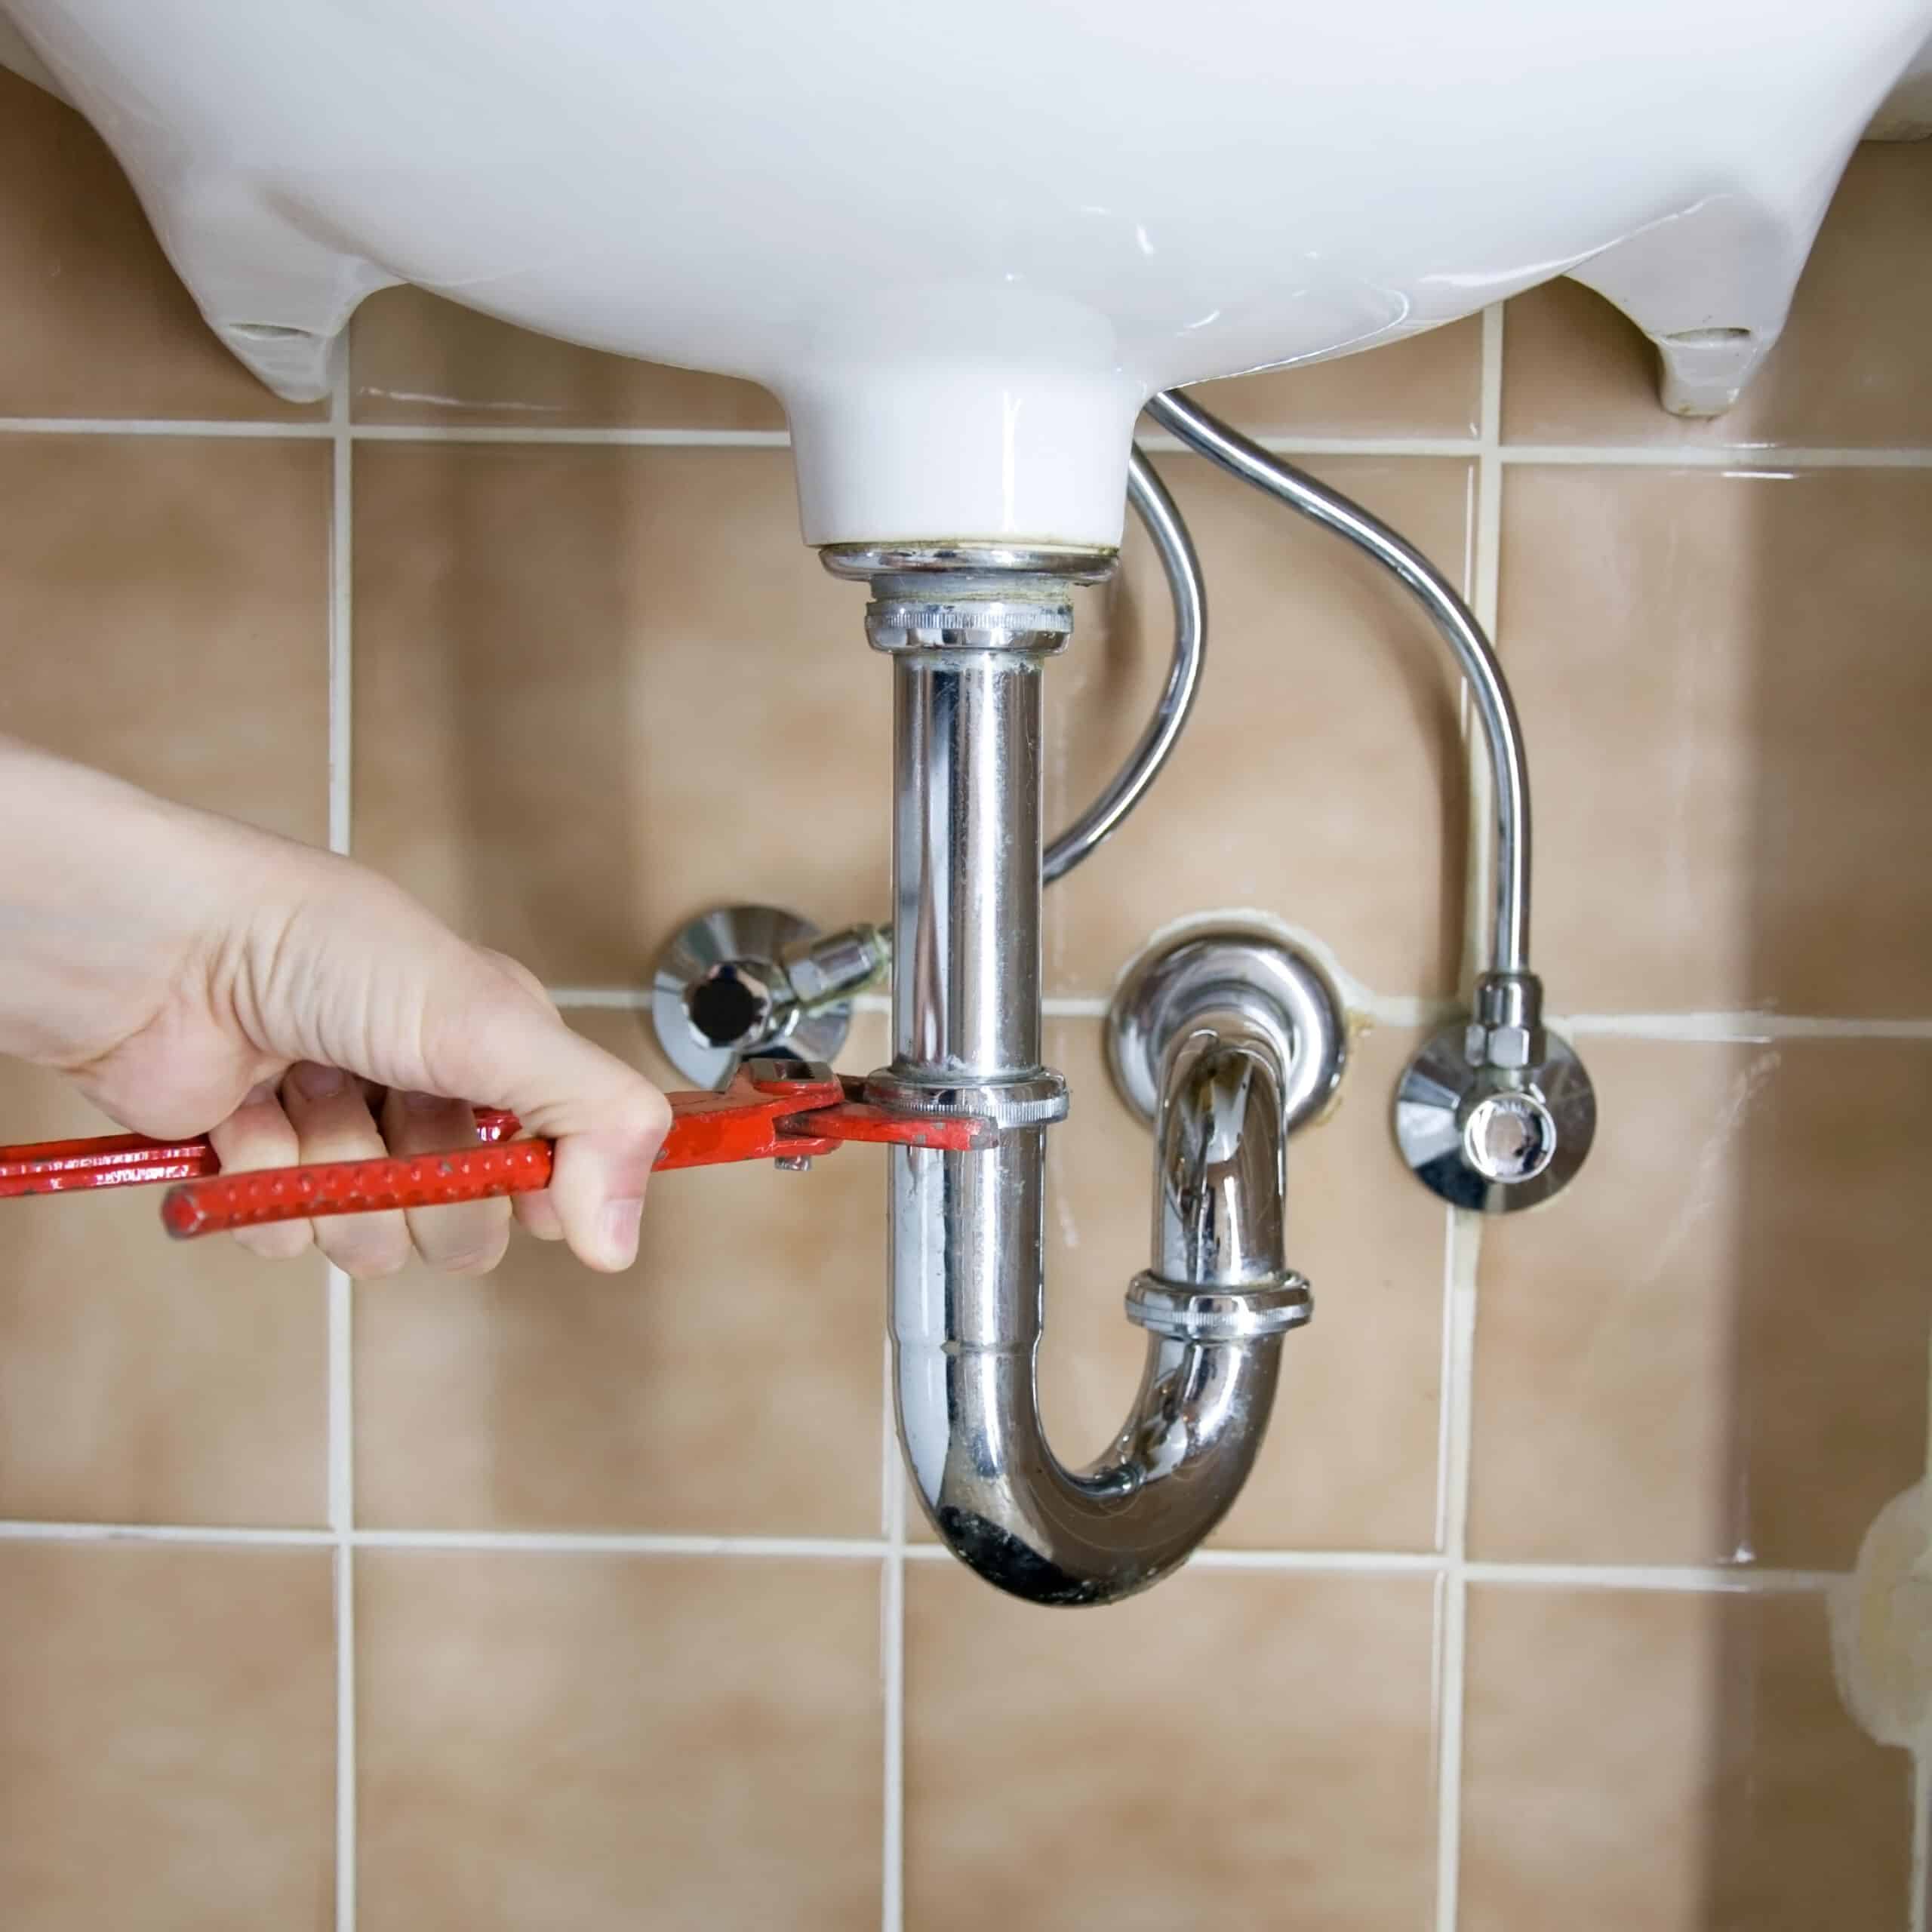 Drain Cleaning Services near me - Pristine Plumbing